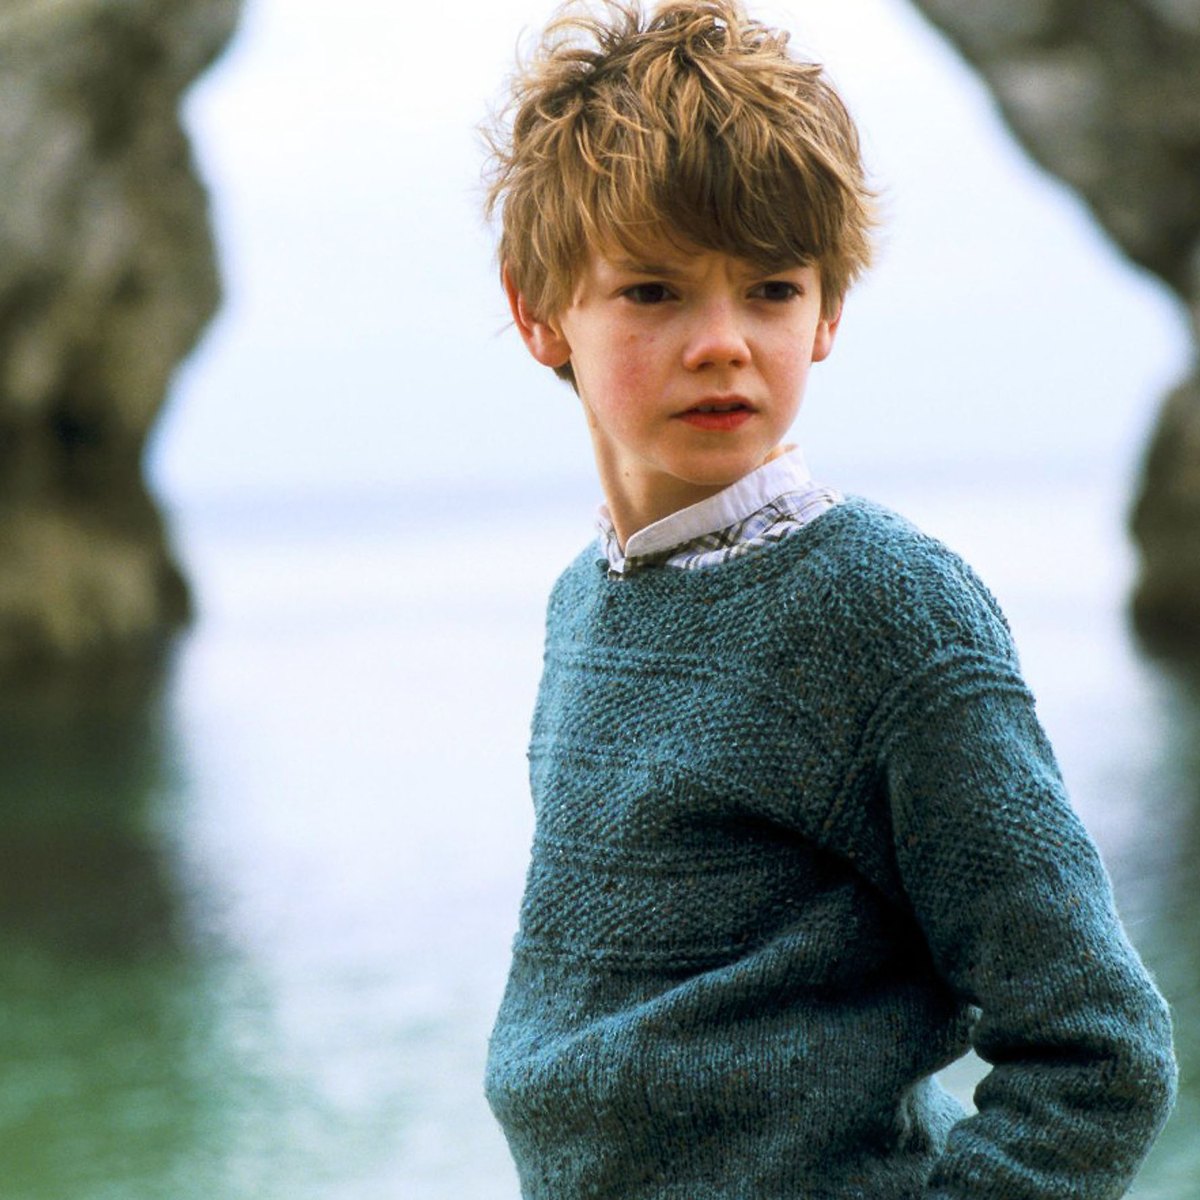 Thomas Brodie-Sangster: Actor emerges from maze of auditions with